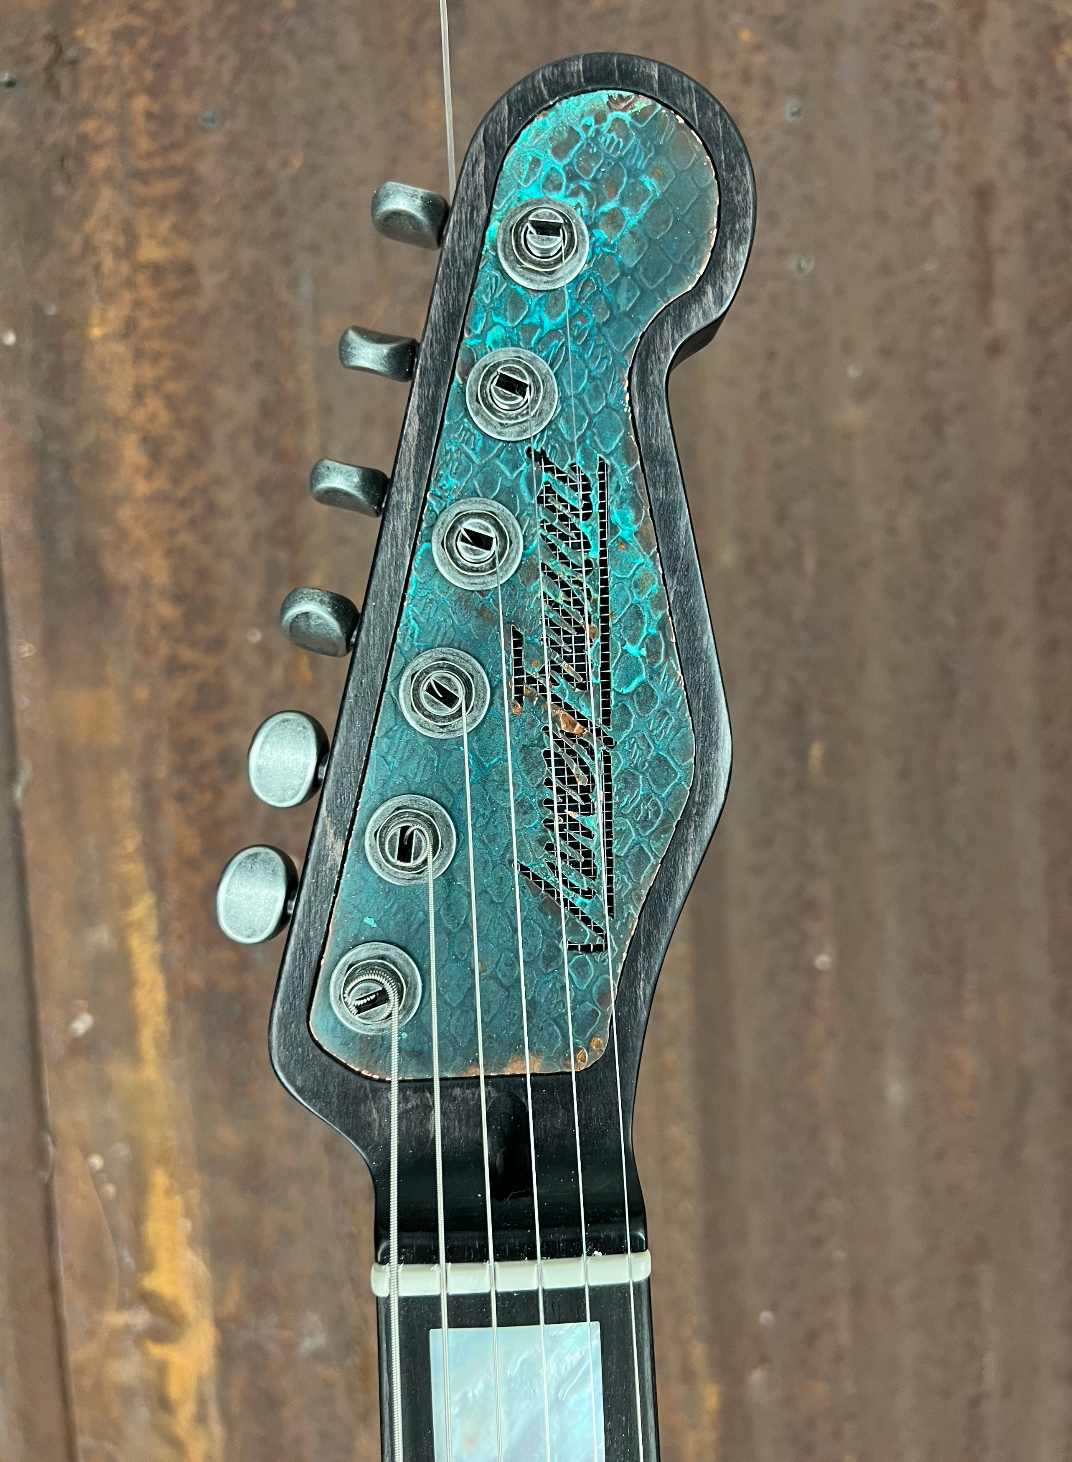 23005 Titanic Green on Black Relic Deluxe SteelCaster